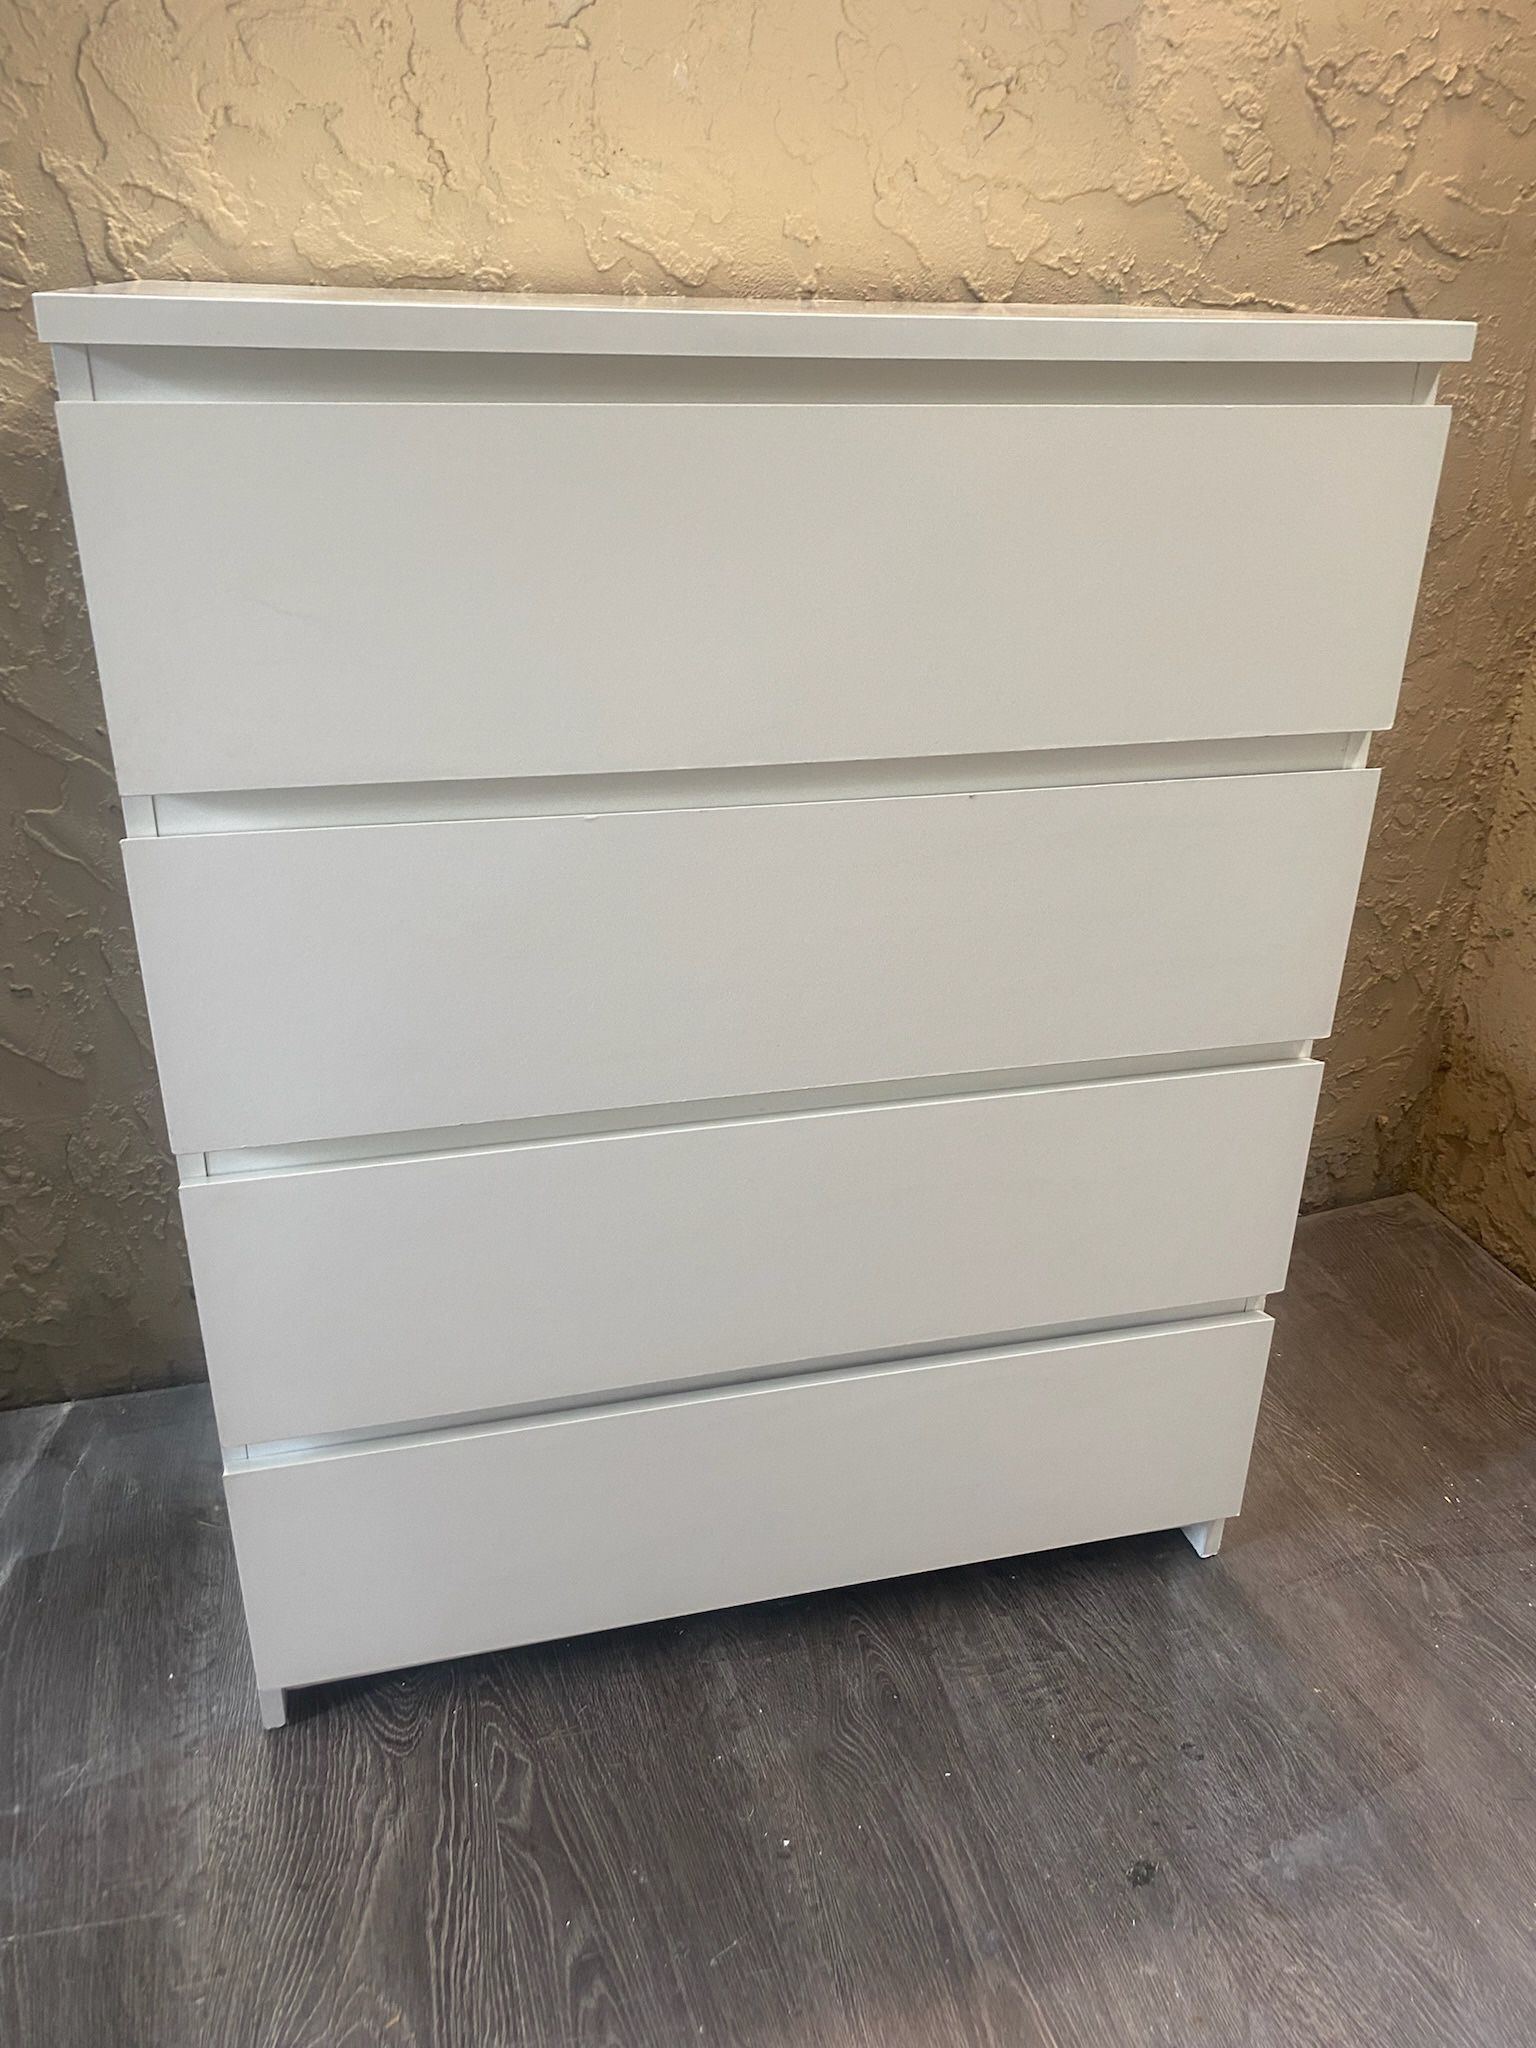 WHITE IKEA MALM DRESSER - Local Delivery for a Fee - See My Items 